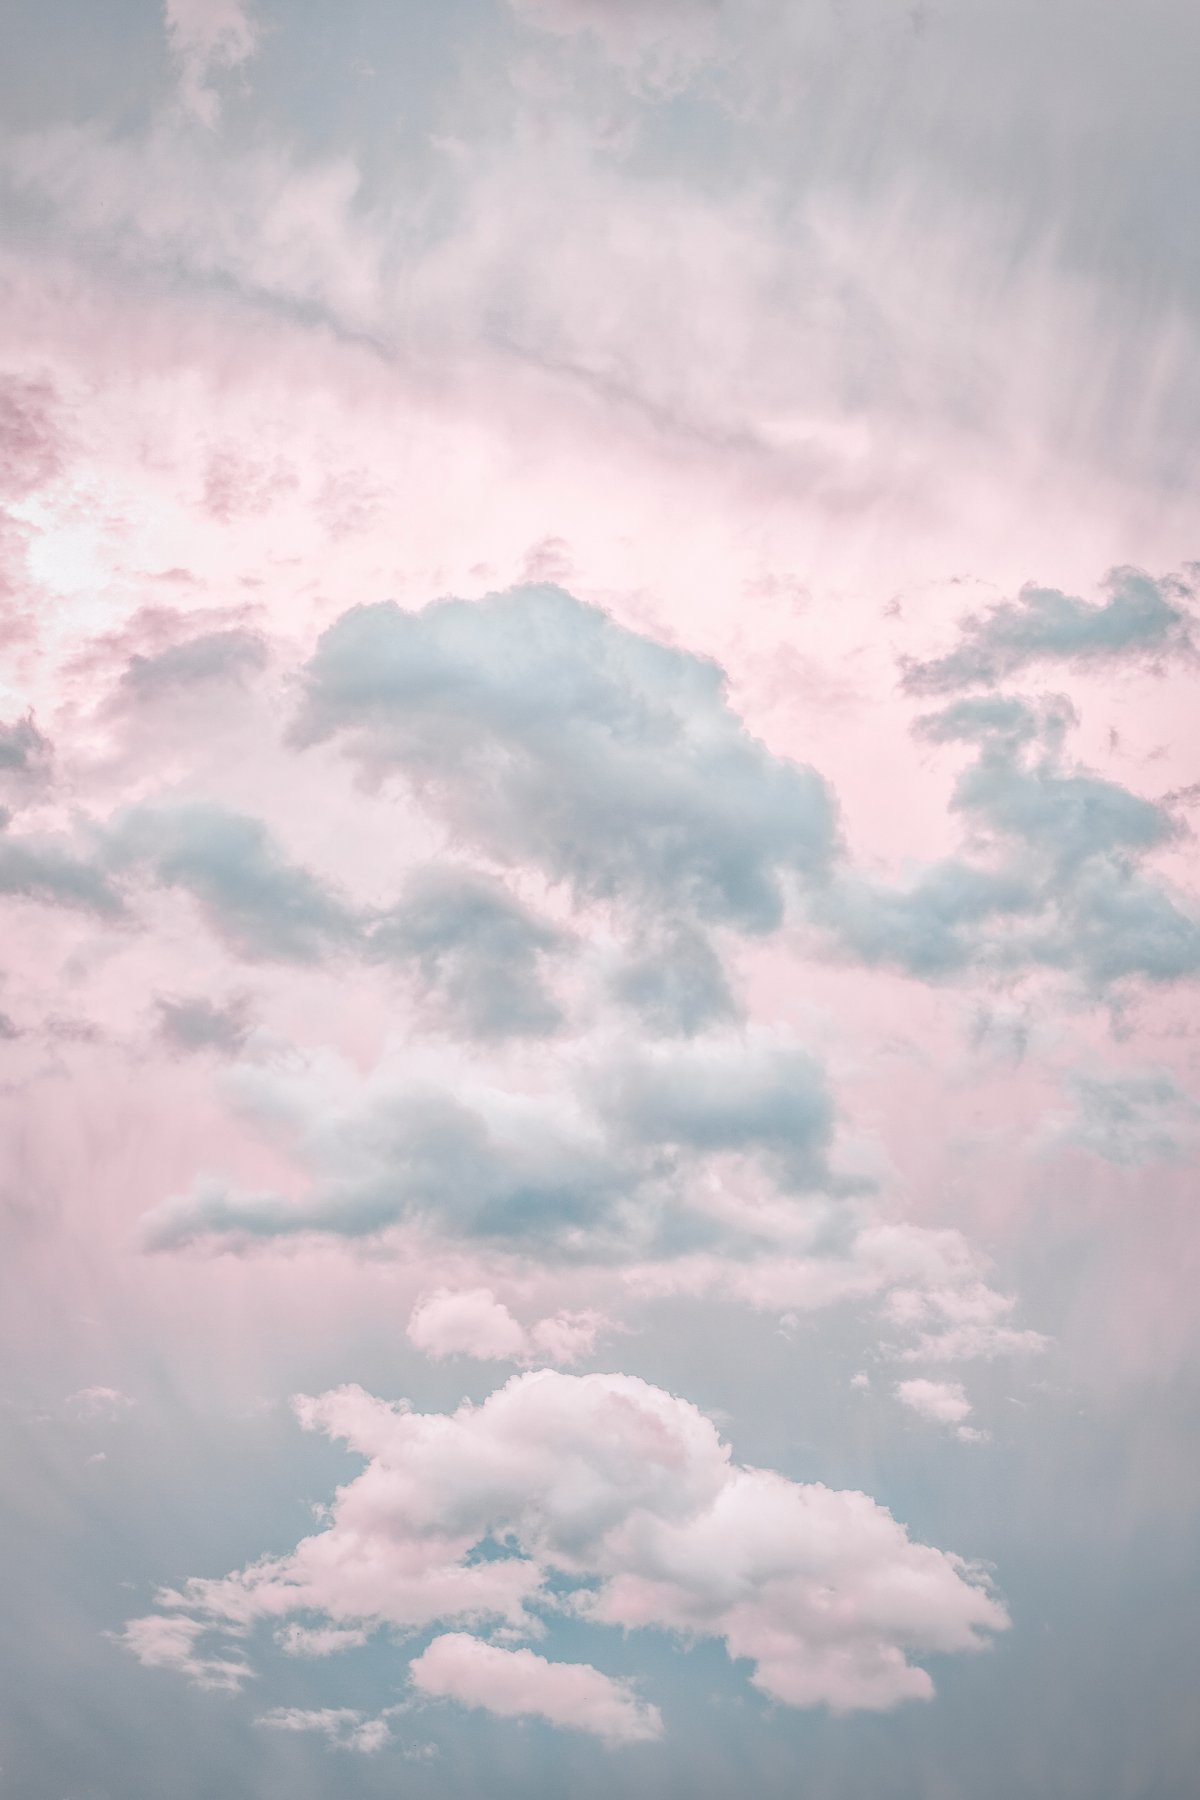 Beautiful sky clouds scenery pictures